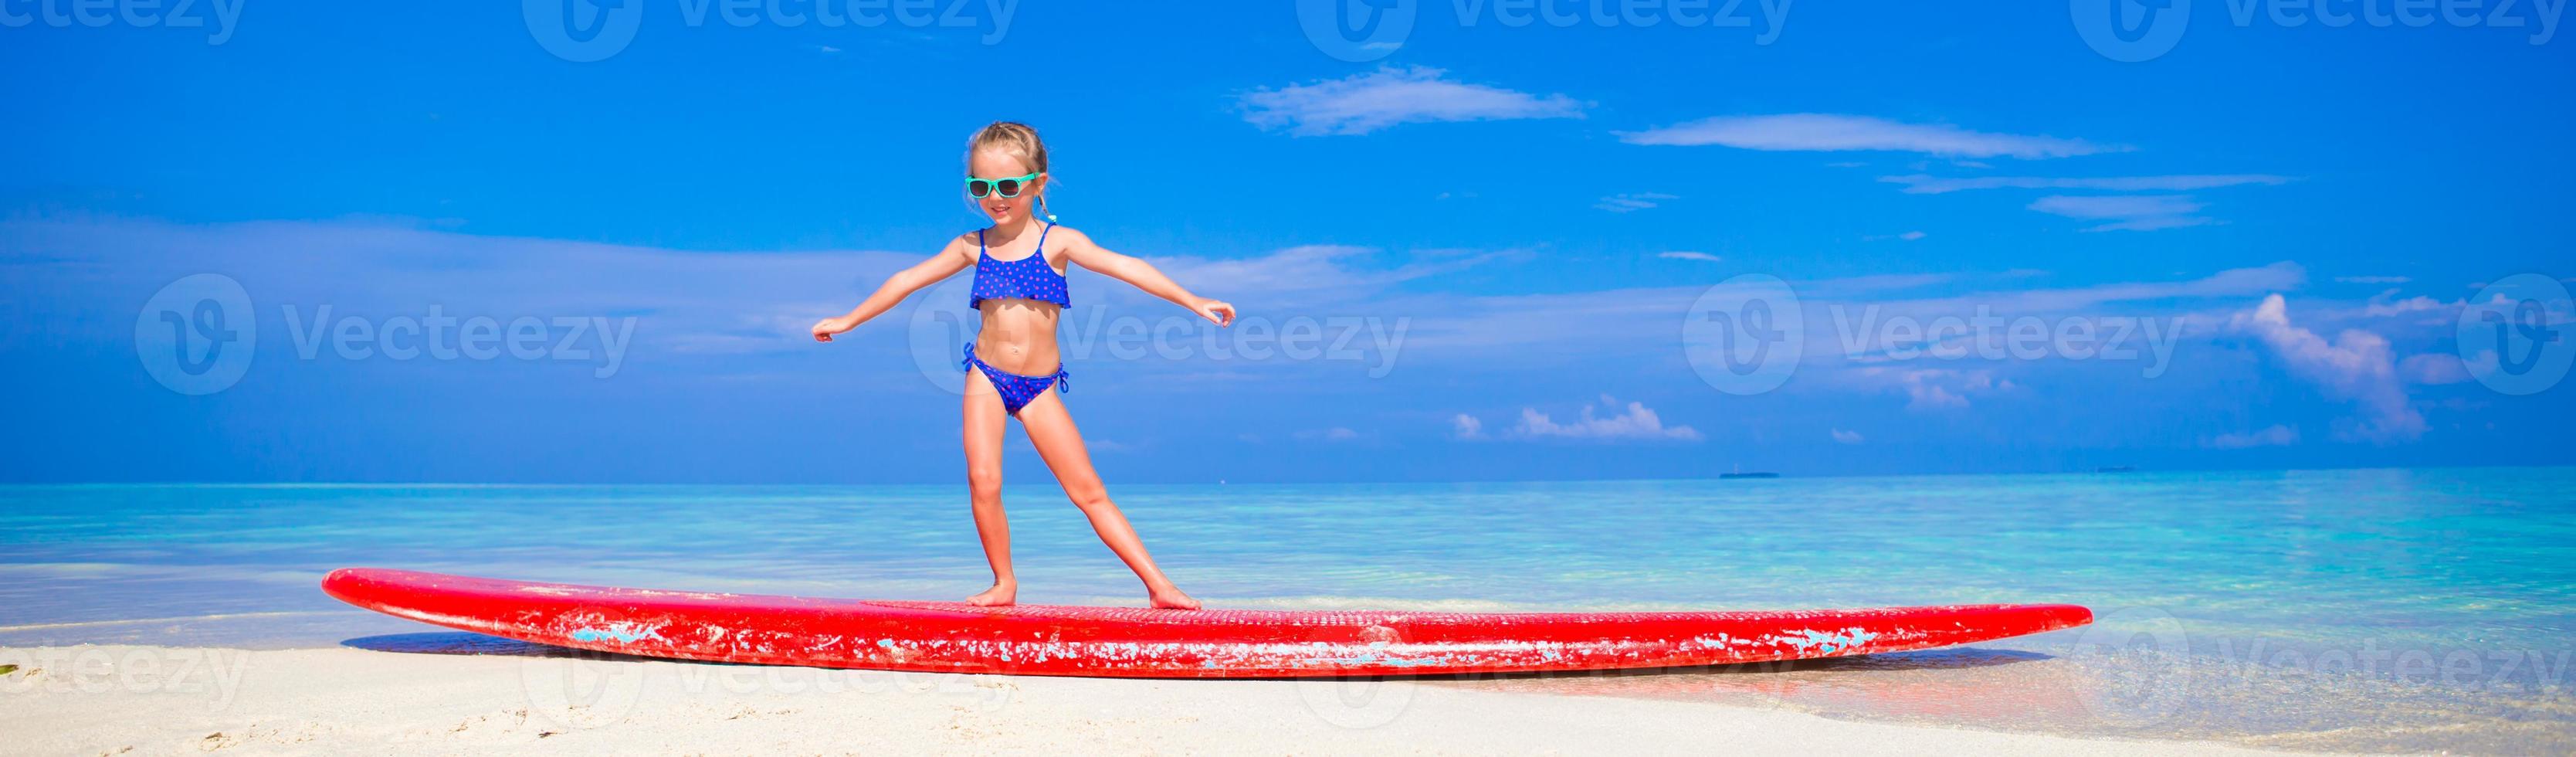 Little adorable girl practice surfing position at beach photo